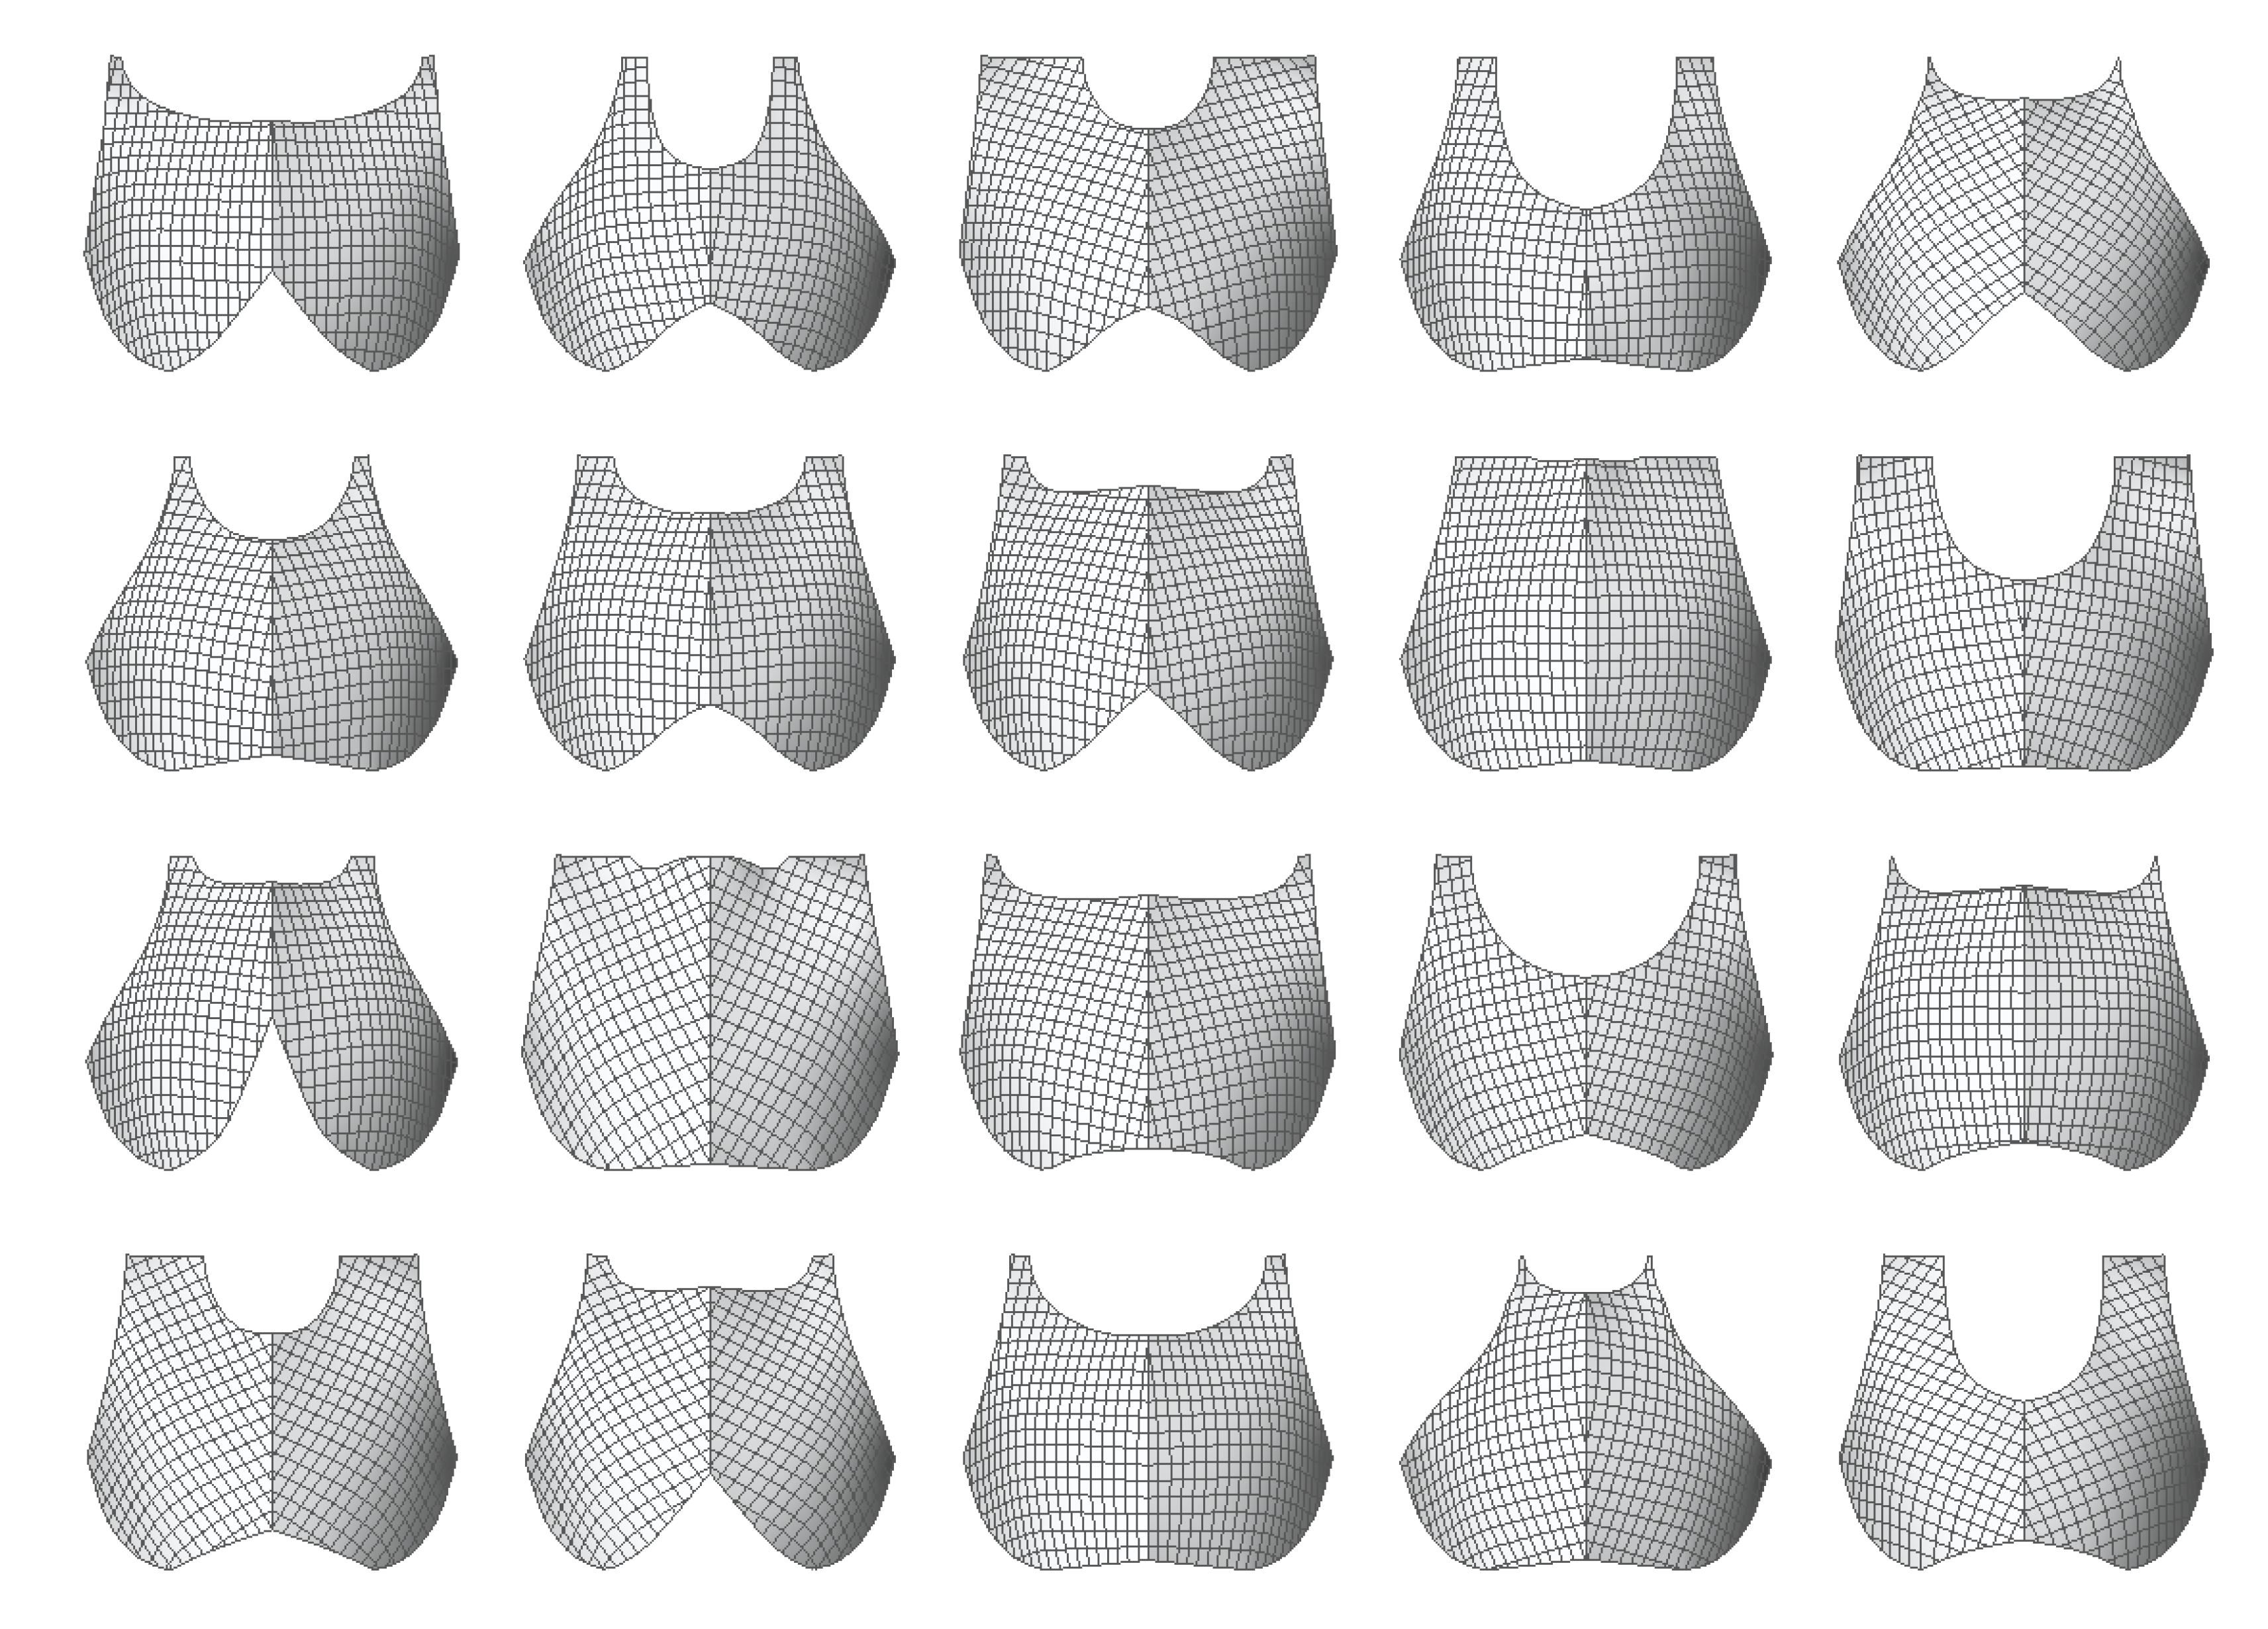 Sports bra pattern and virtual fit by pattern reduction rate: (a